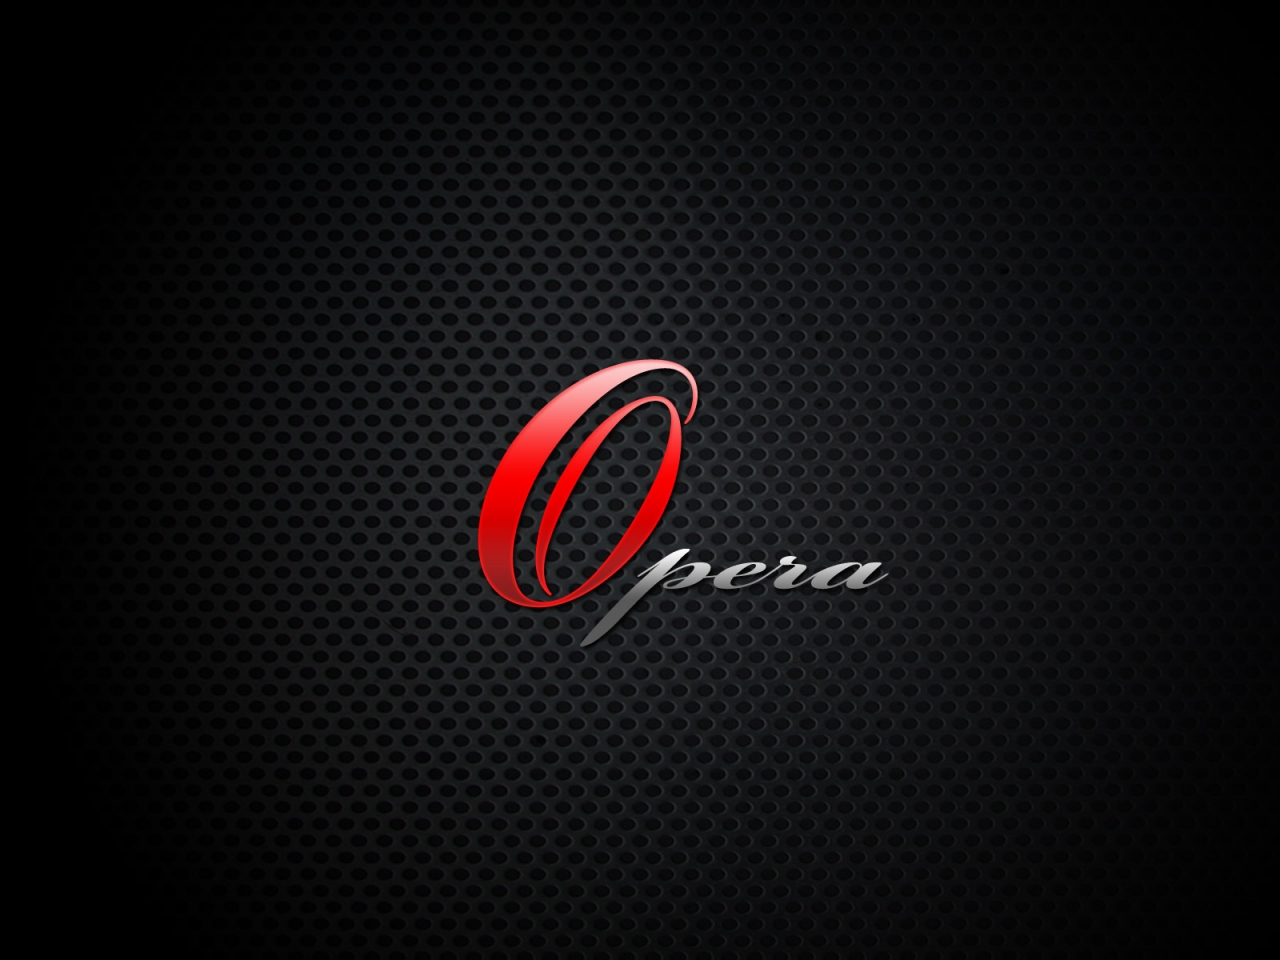 Opera Browser Tech for 1280 x 960 resolution